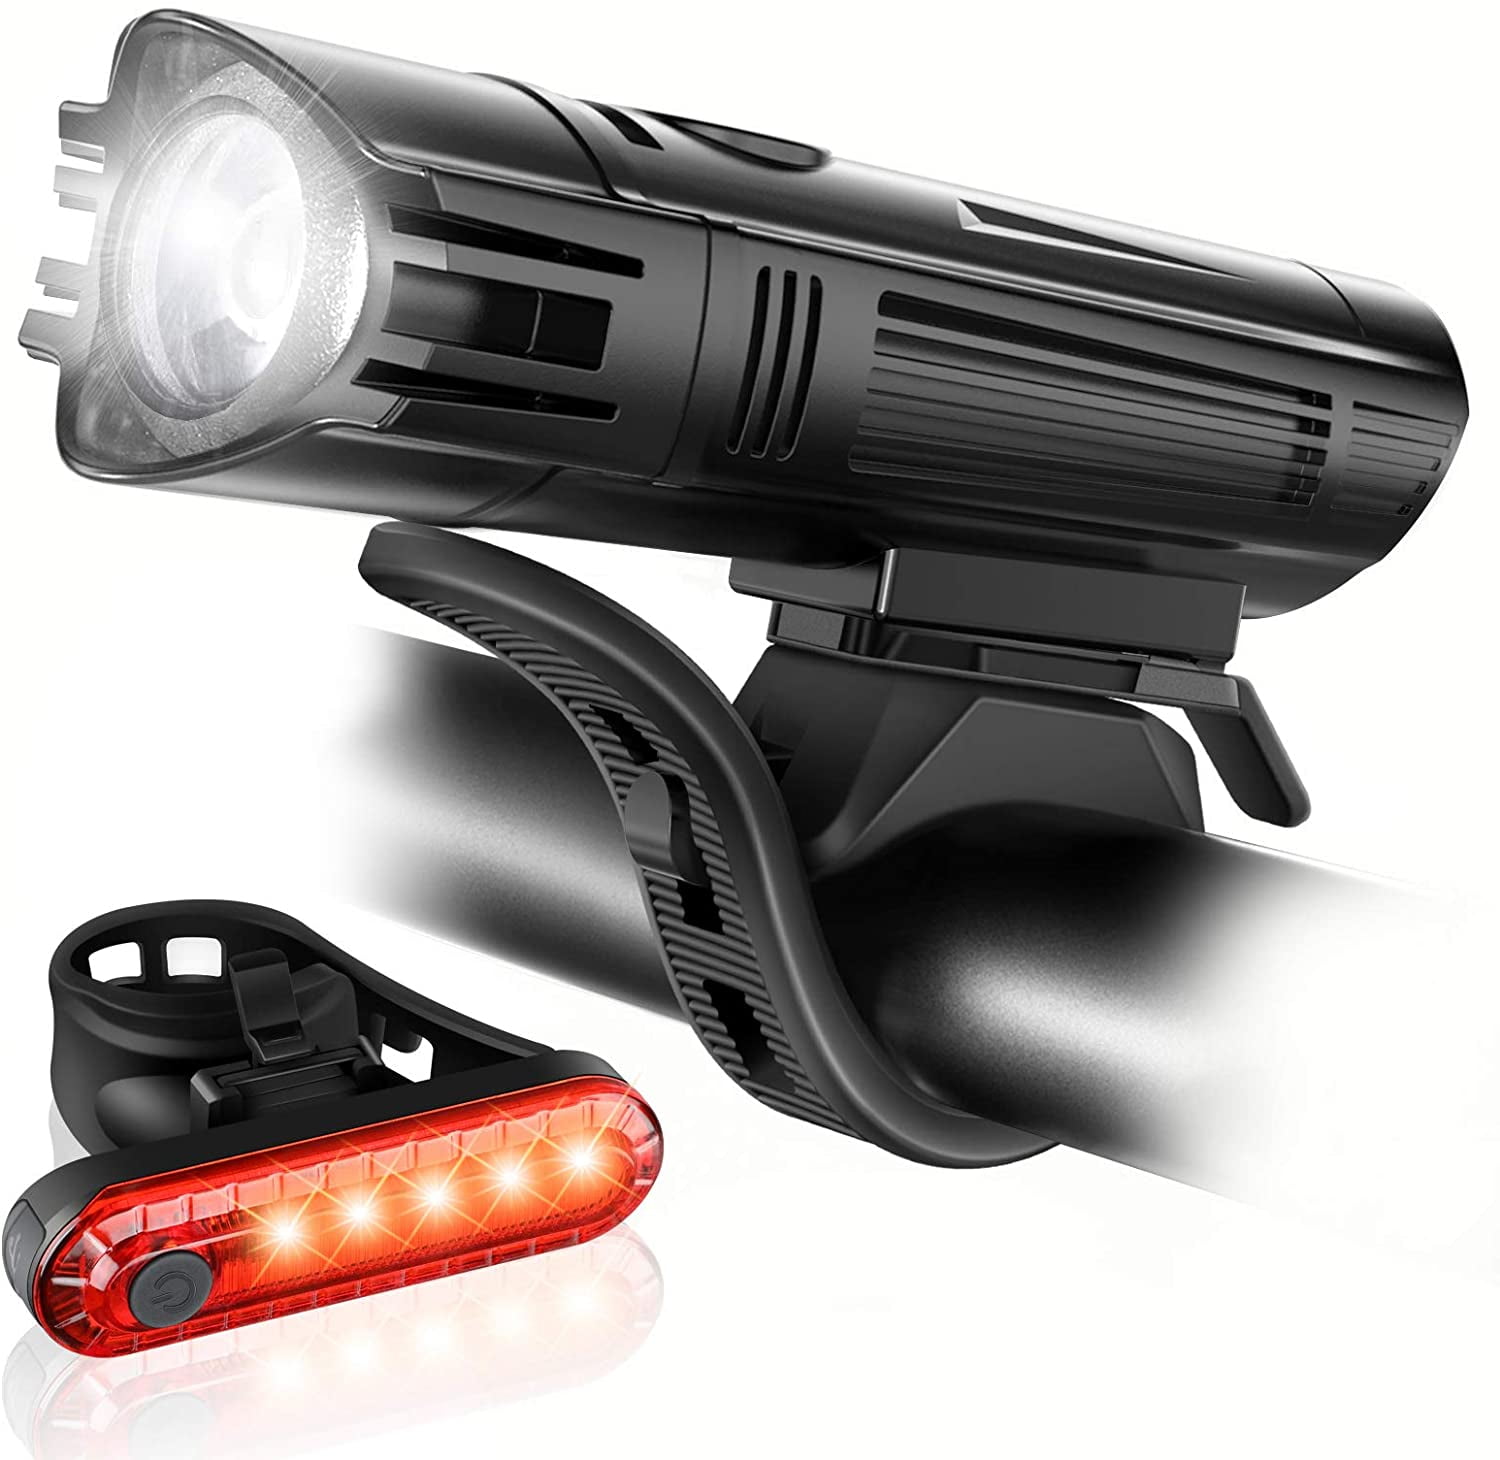 Ultra Bright USB Rechargeable Bike Light Set Bicycle Headlight Front Rear Lamp 